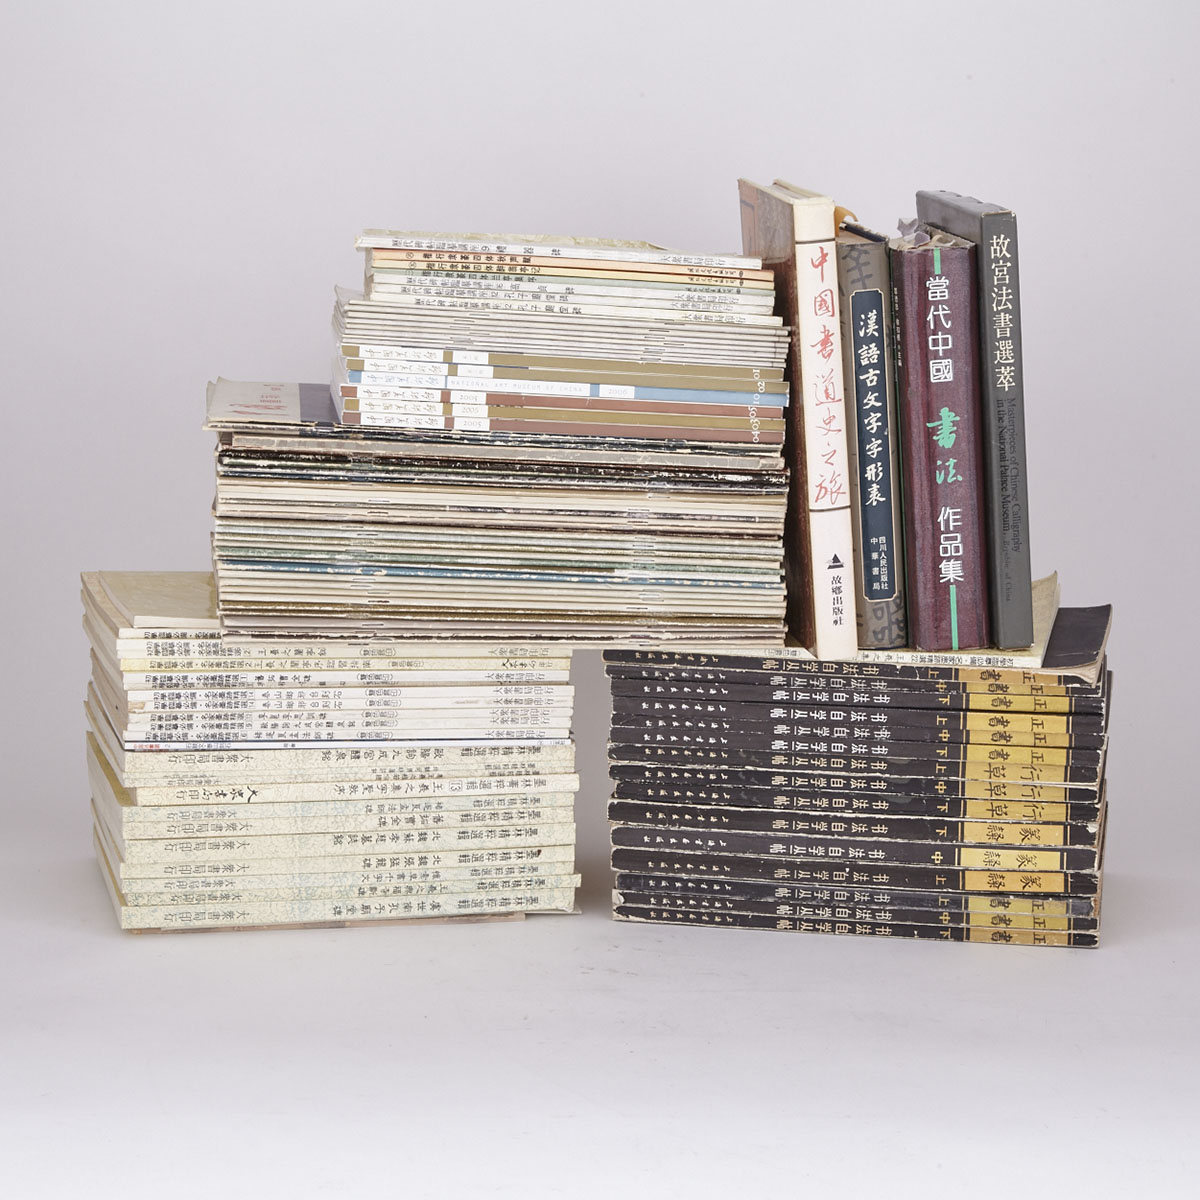 Approximately 95 Volumes and Magazines on Chinese Painting